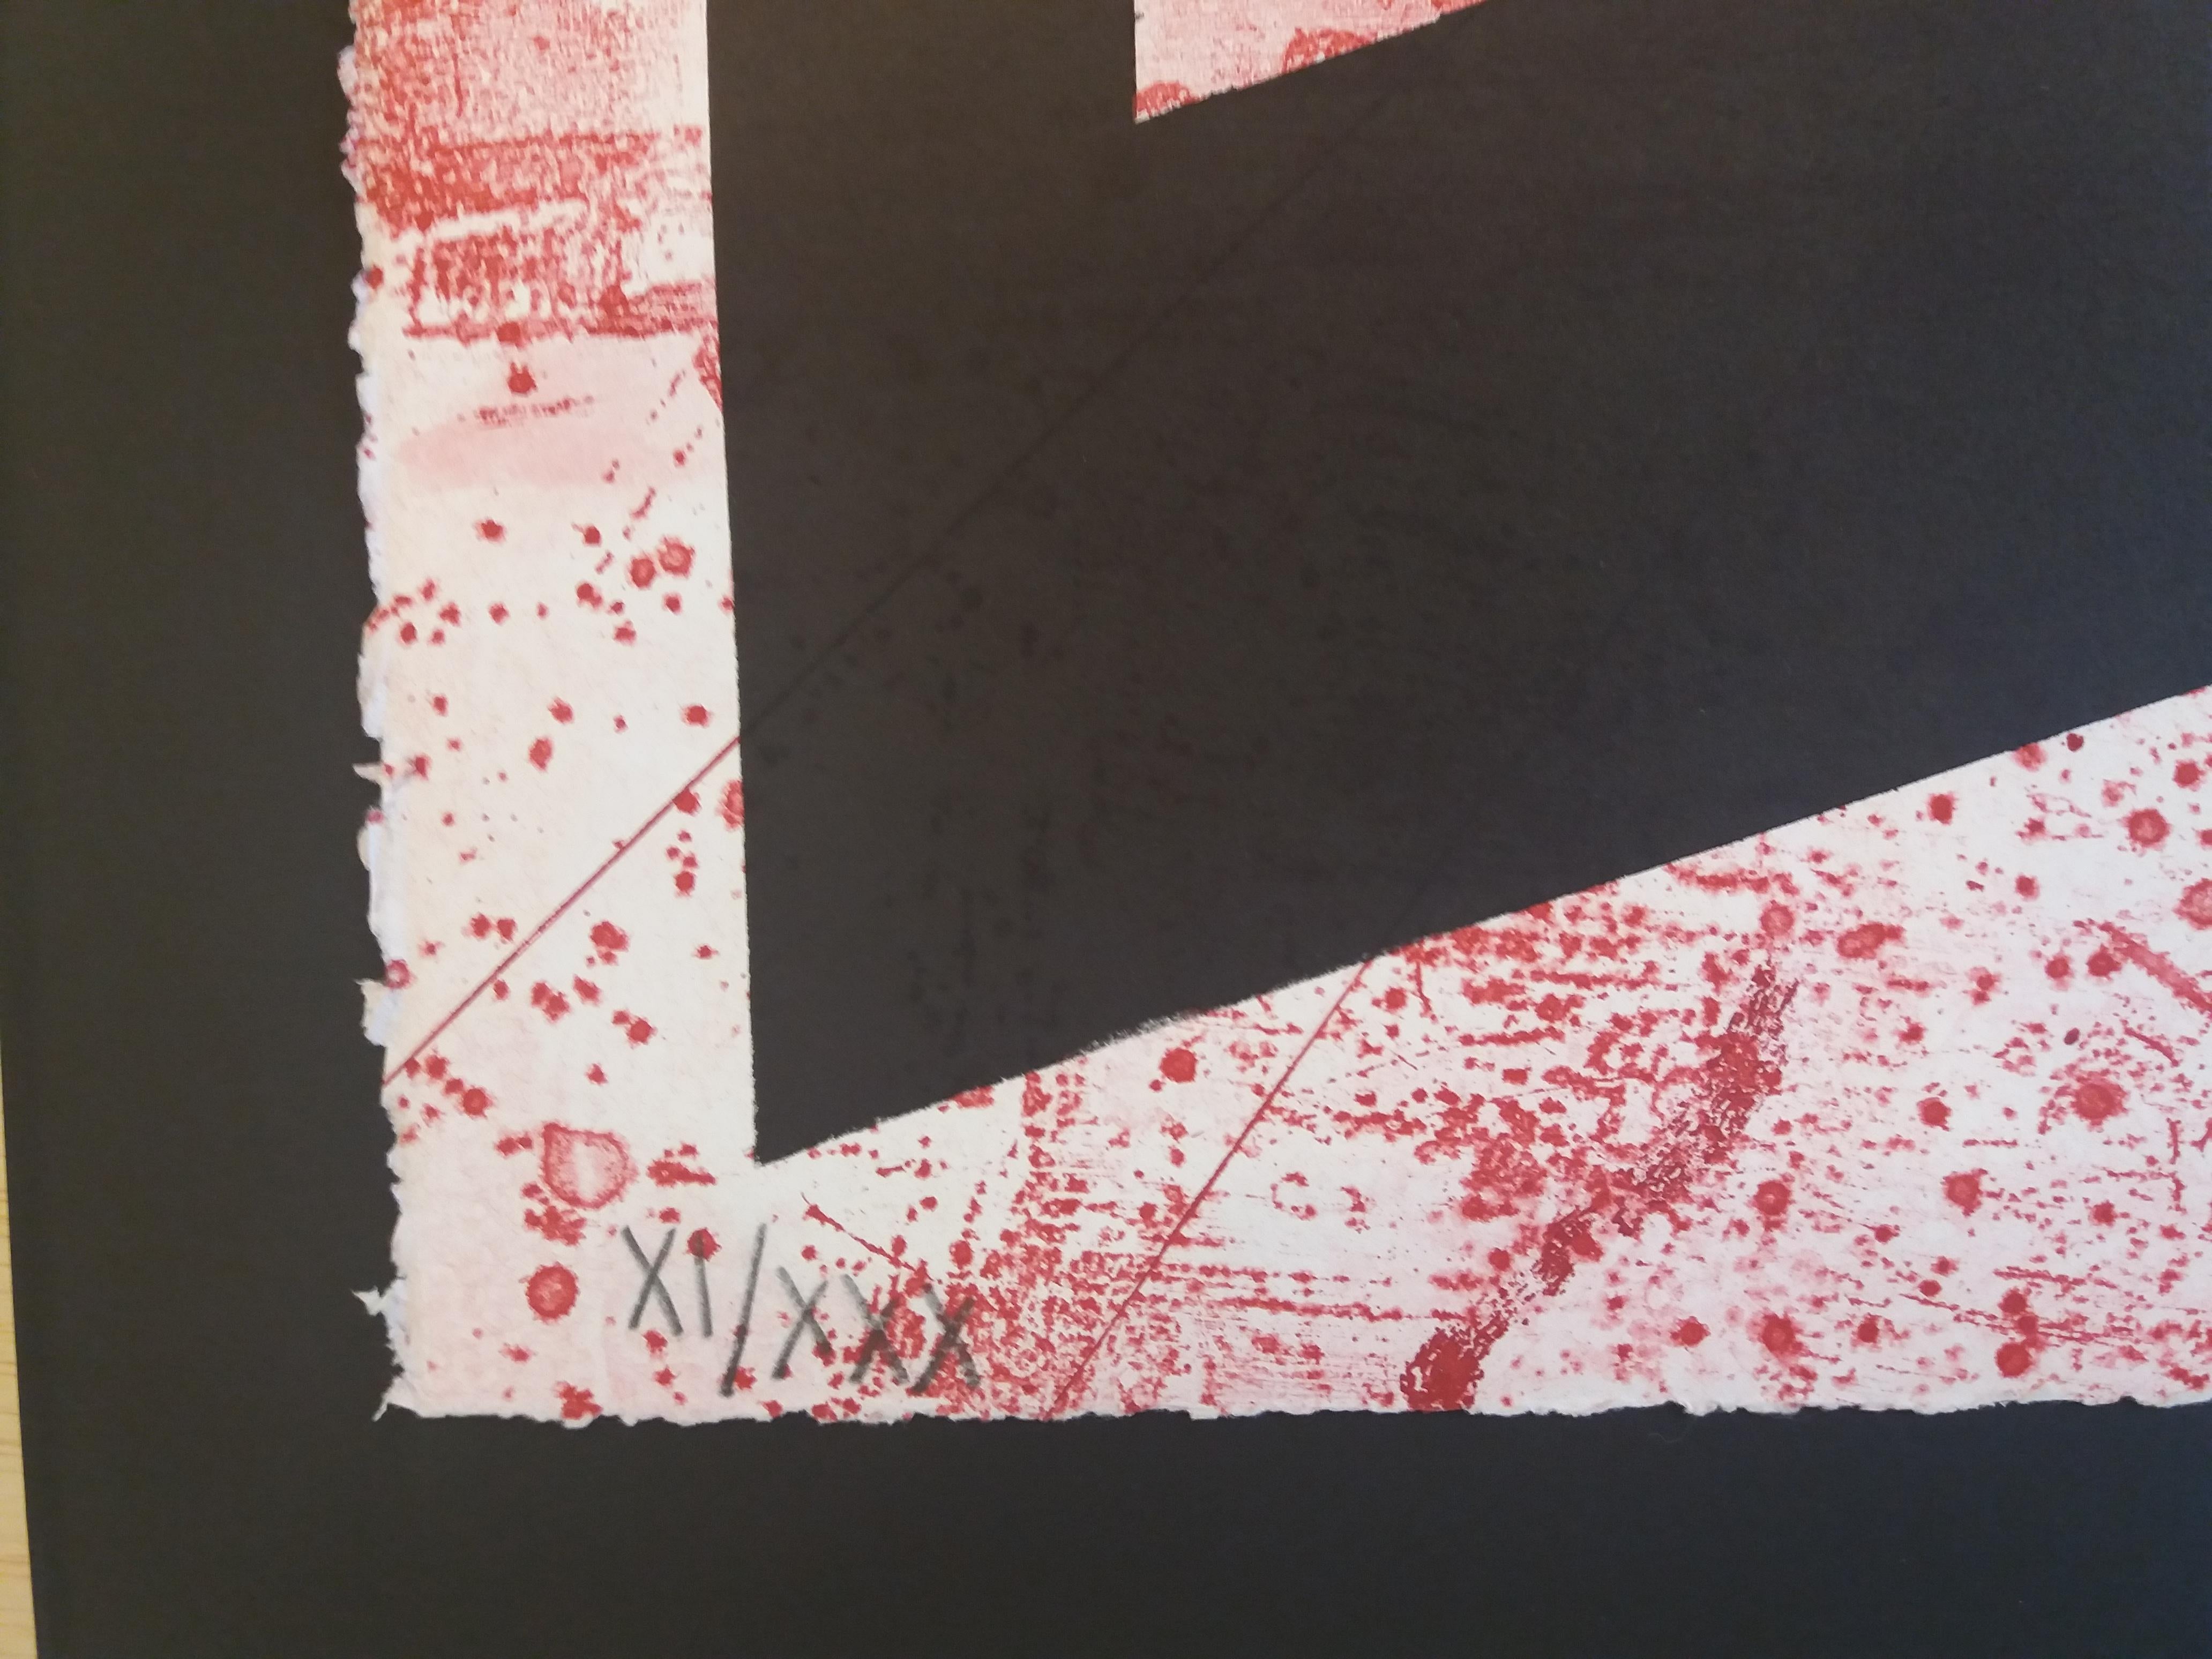 Feito Abstract. Red White  Black  limited edition painting - Abstract Expressionist Painting by Luis Feito López